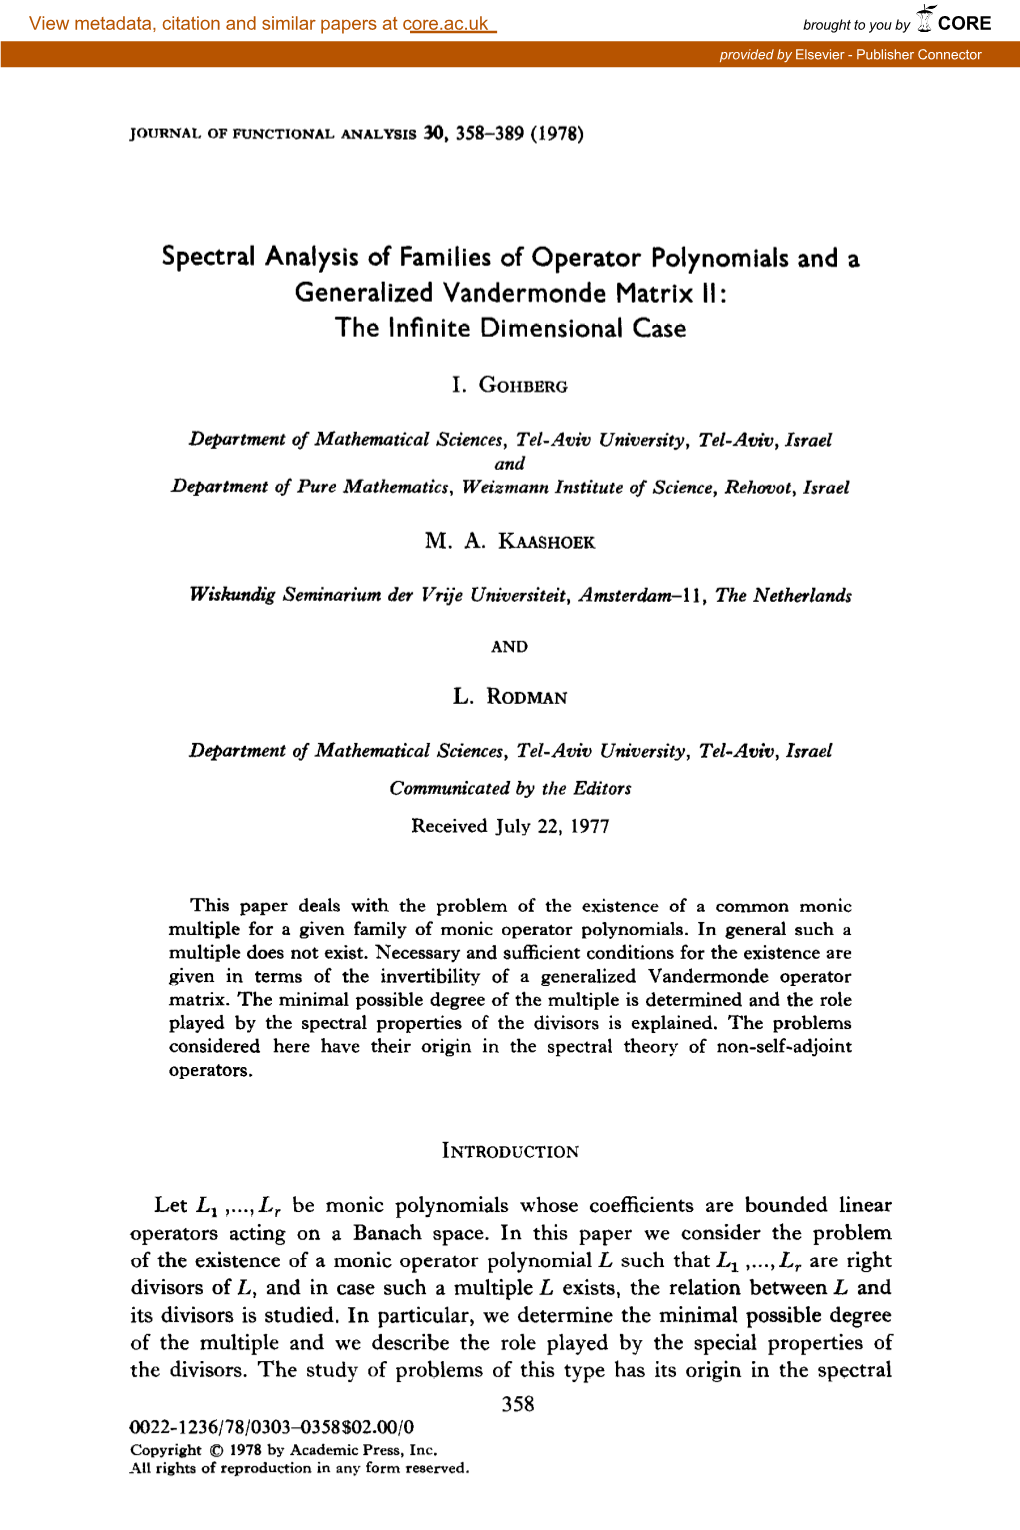 Spectral Analysis of Families of Operator Polynomials and a Generalized Vandermonde Matrix II : the Infinite Dimensional Case